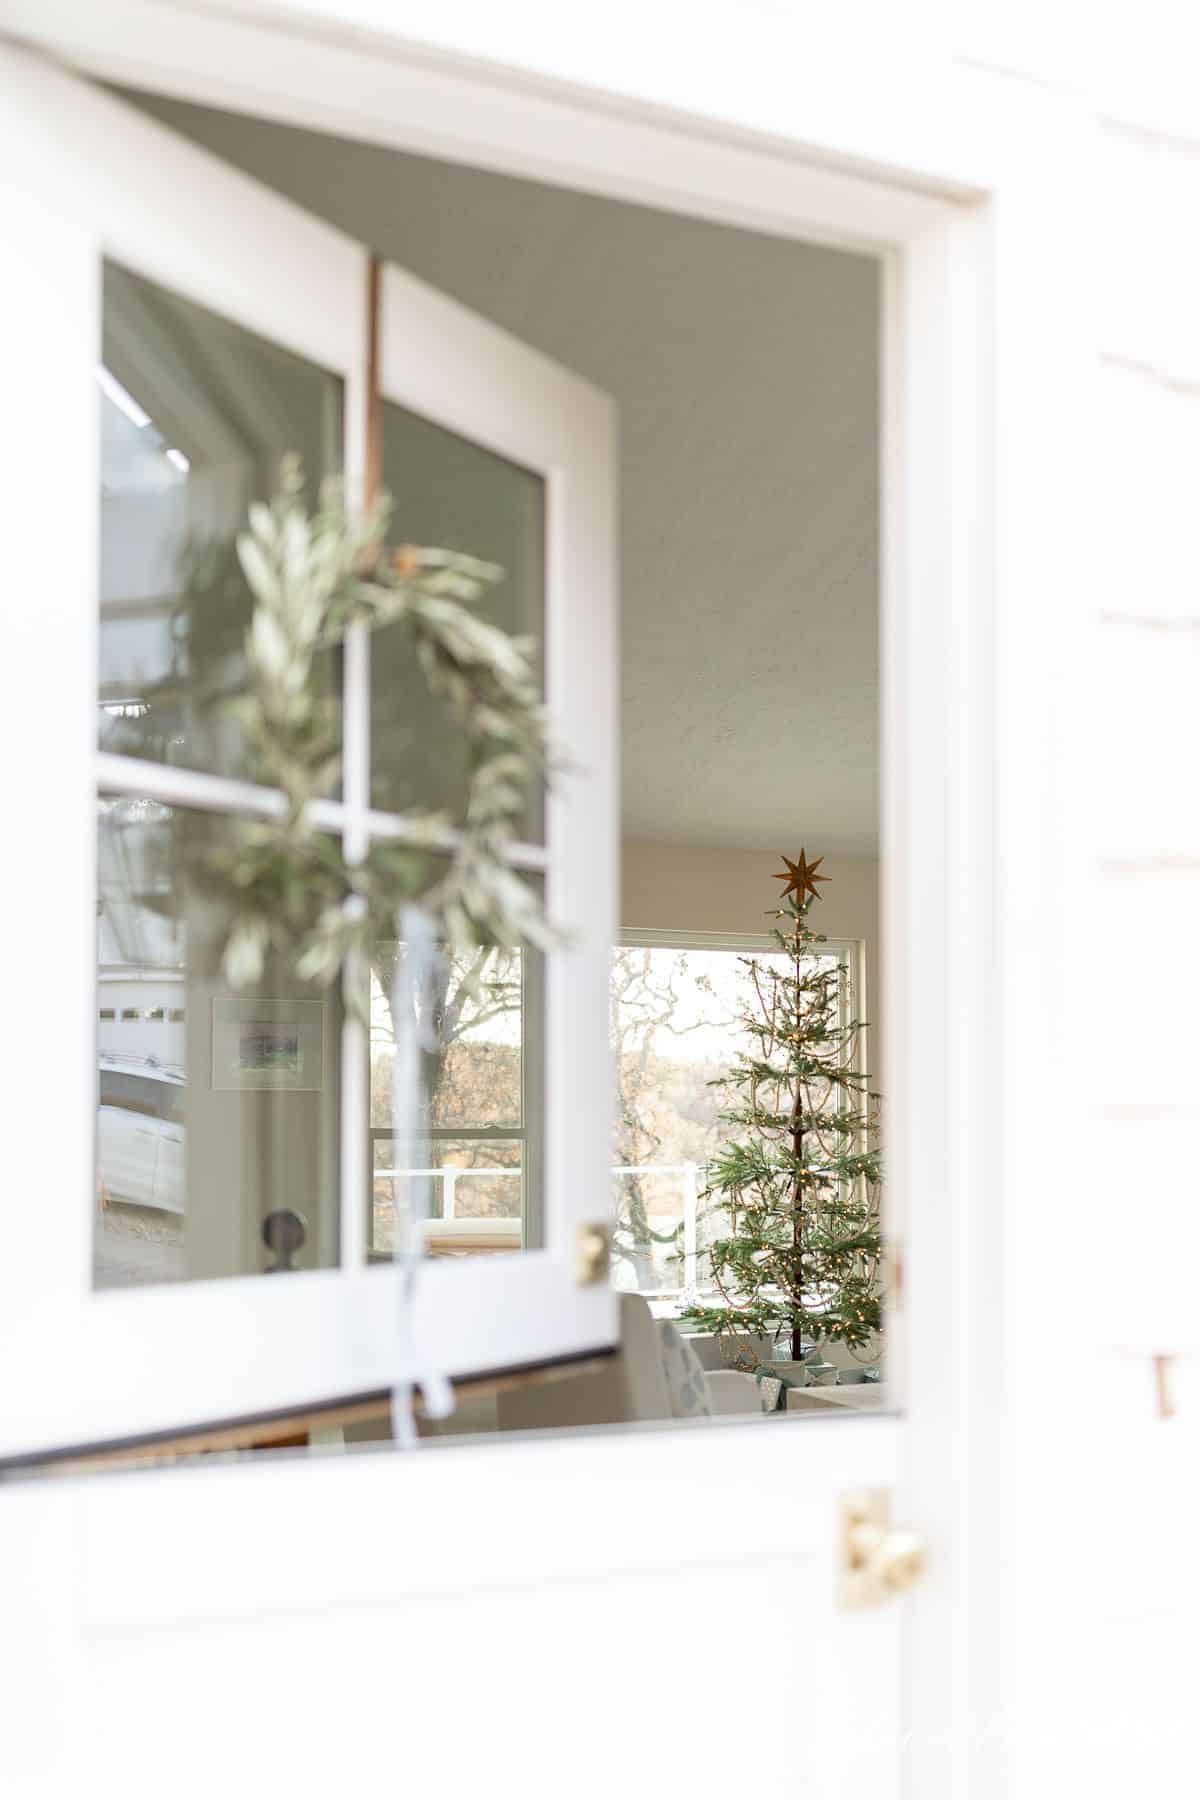 A dutch door with a DIY wreath hanging on the windows, looking into a living room decorated for Christmas.